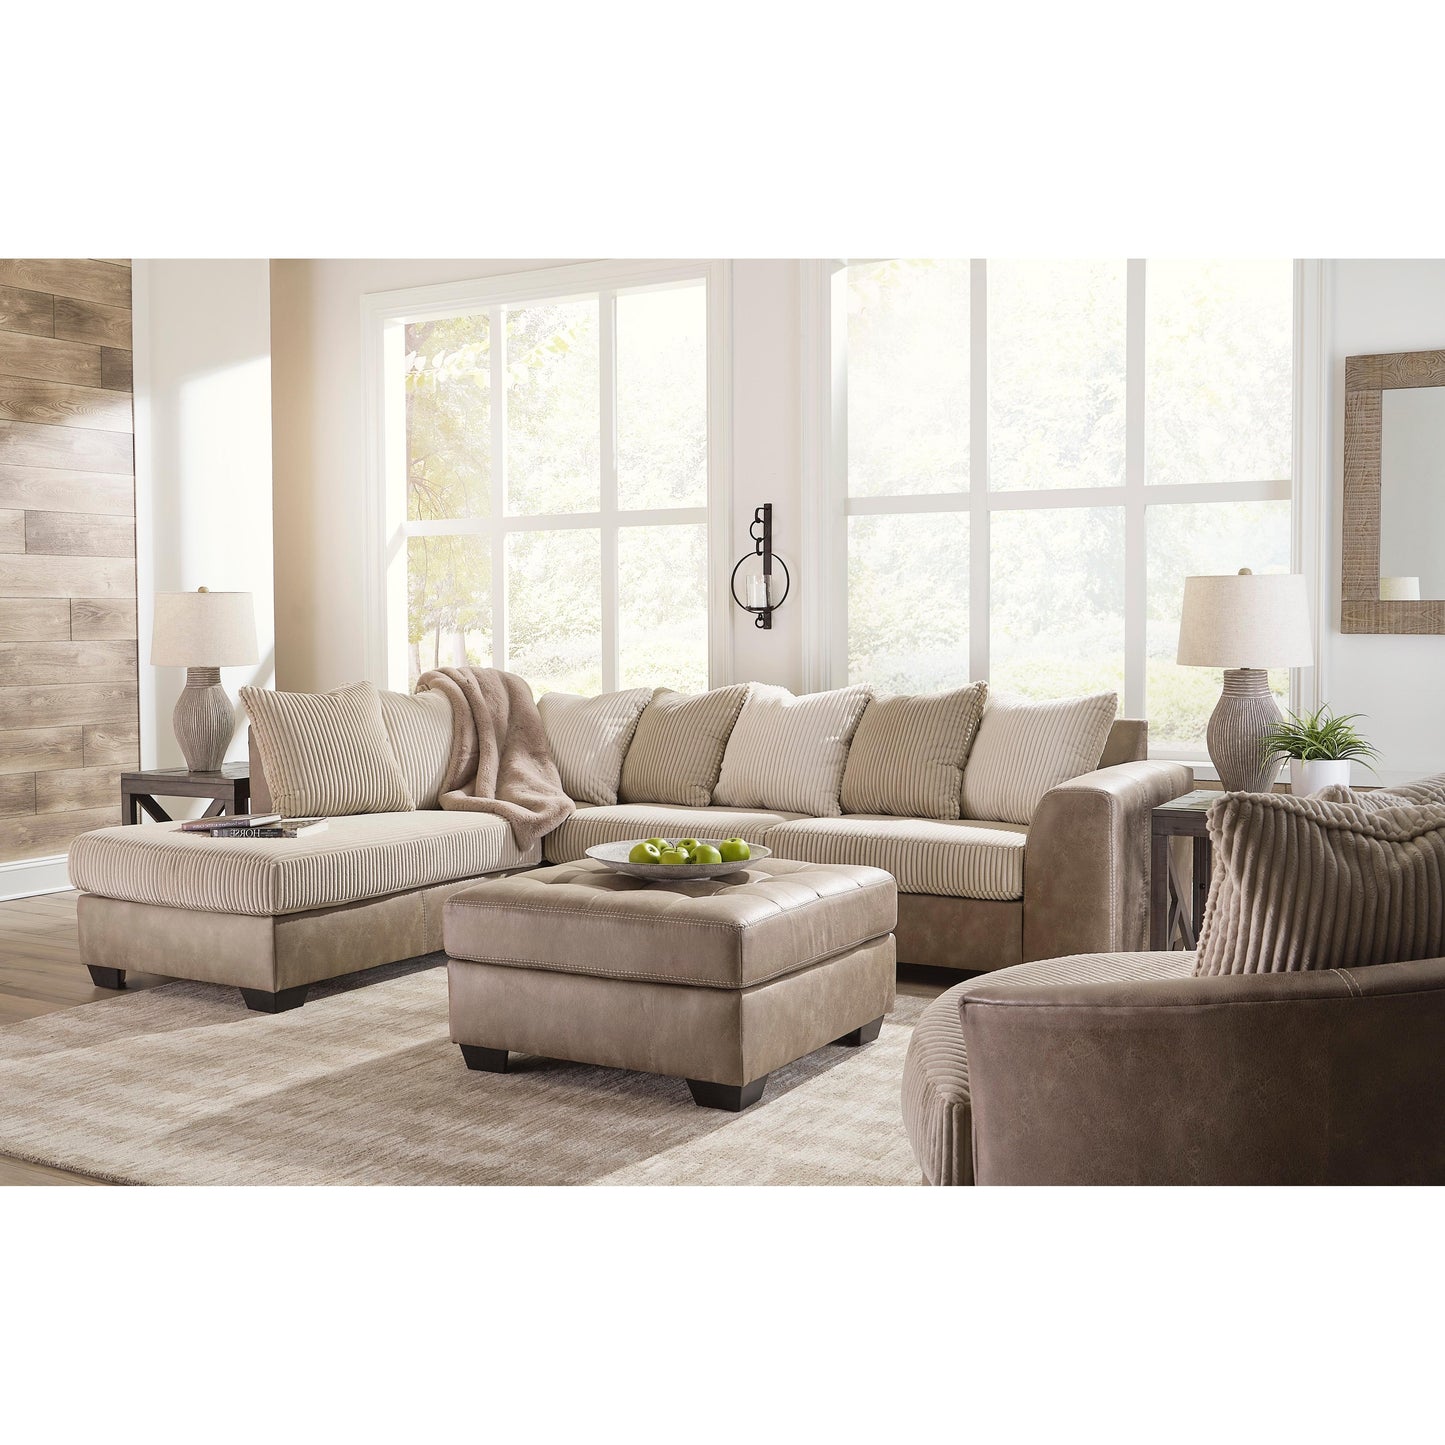 Signature Design by Ashley Keskin Fabric and Leather Look 2 pc Sectional 1840316/1840367 IMAGE 5